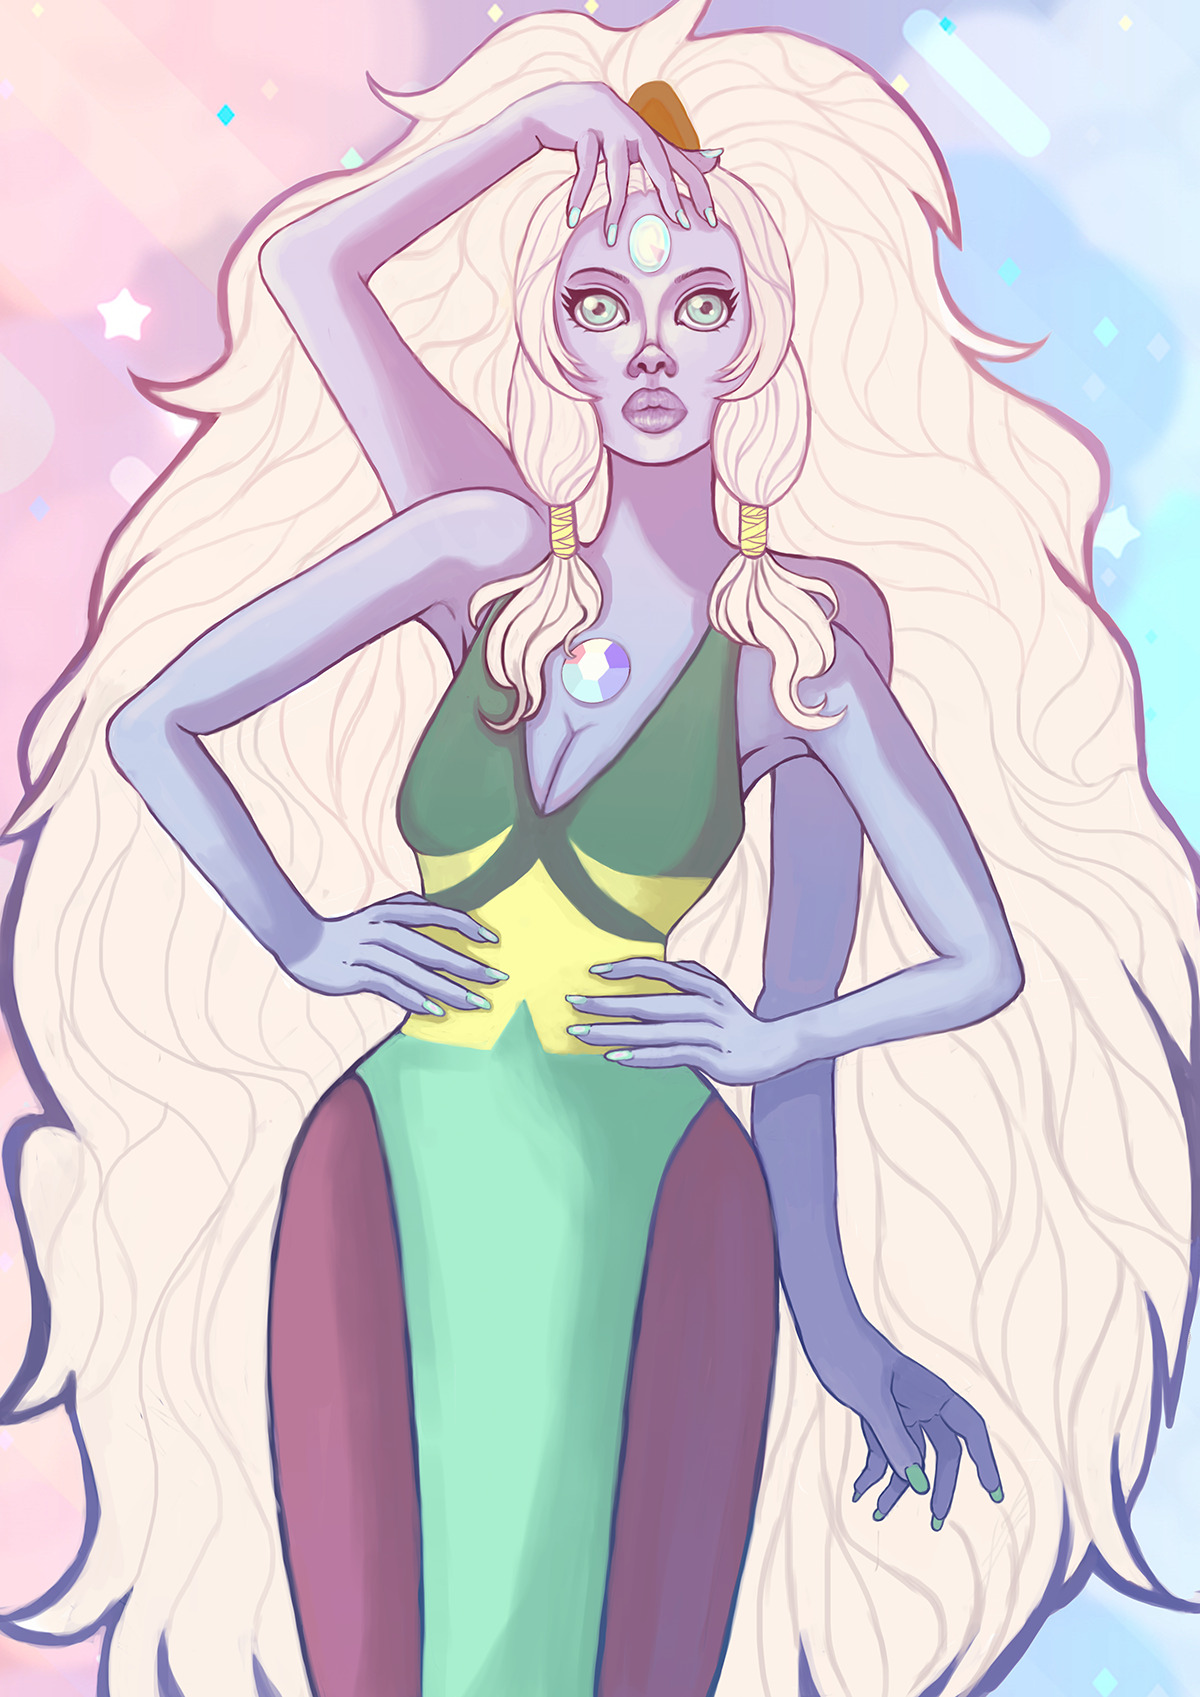 Commission of Opal for a client. She is a Steven Universe fan. I’m very happy with the result and the time of resolution. This giant woman was made in 2 days. For commissions and works:...